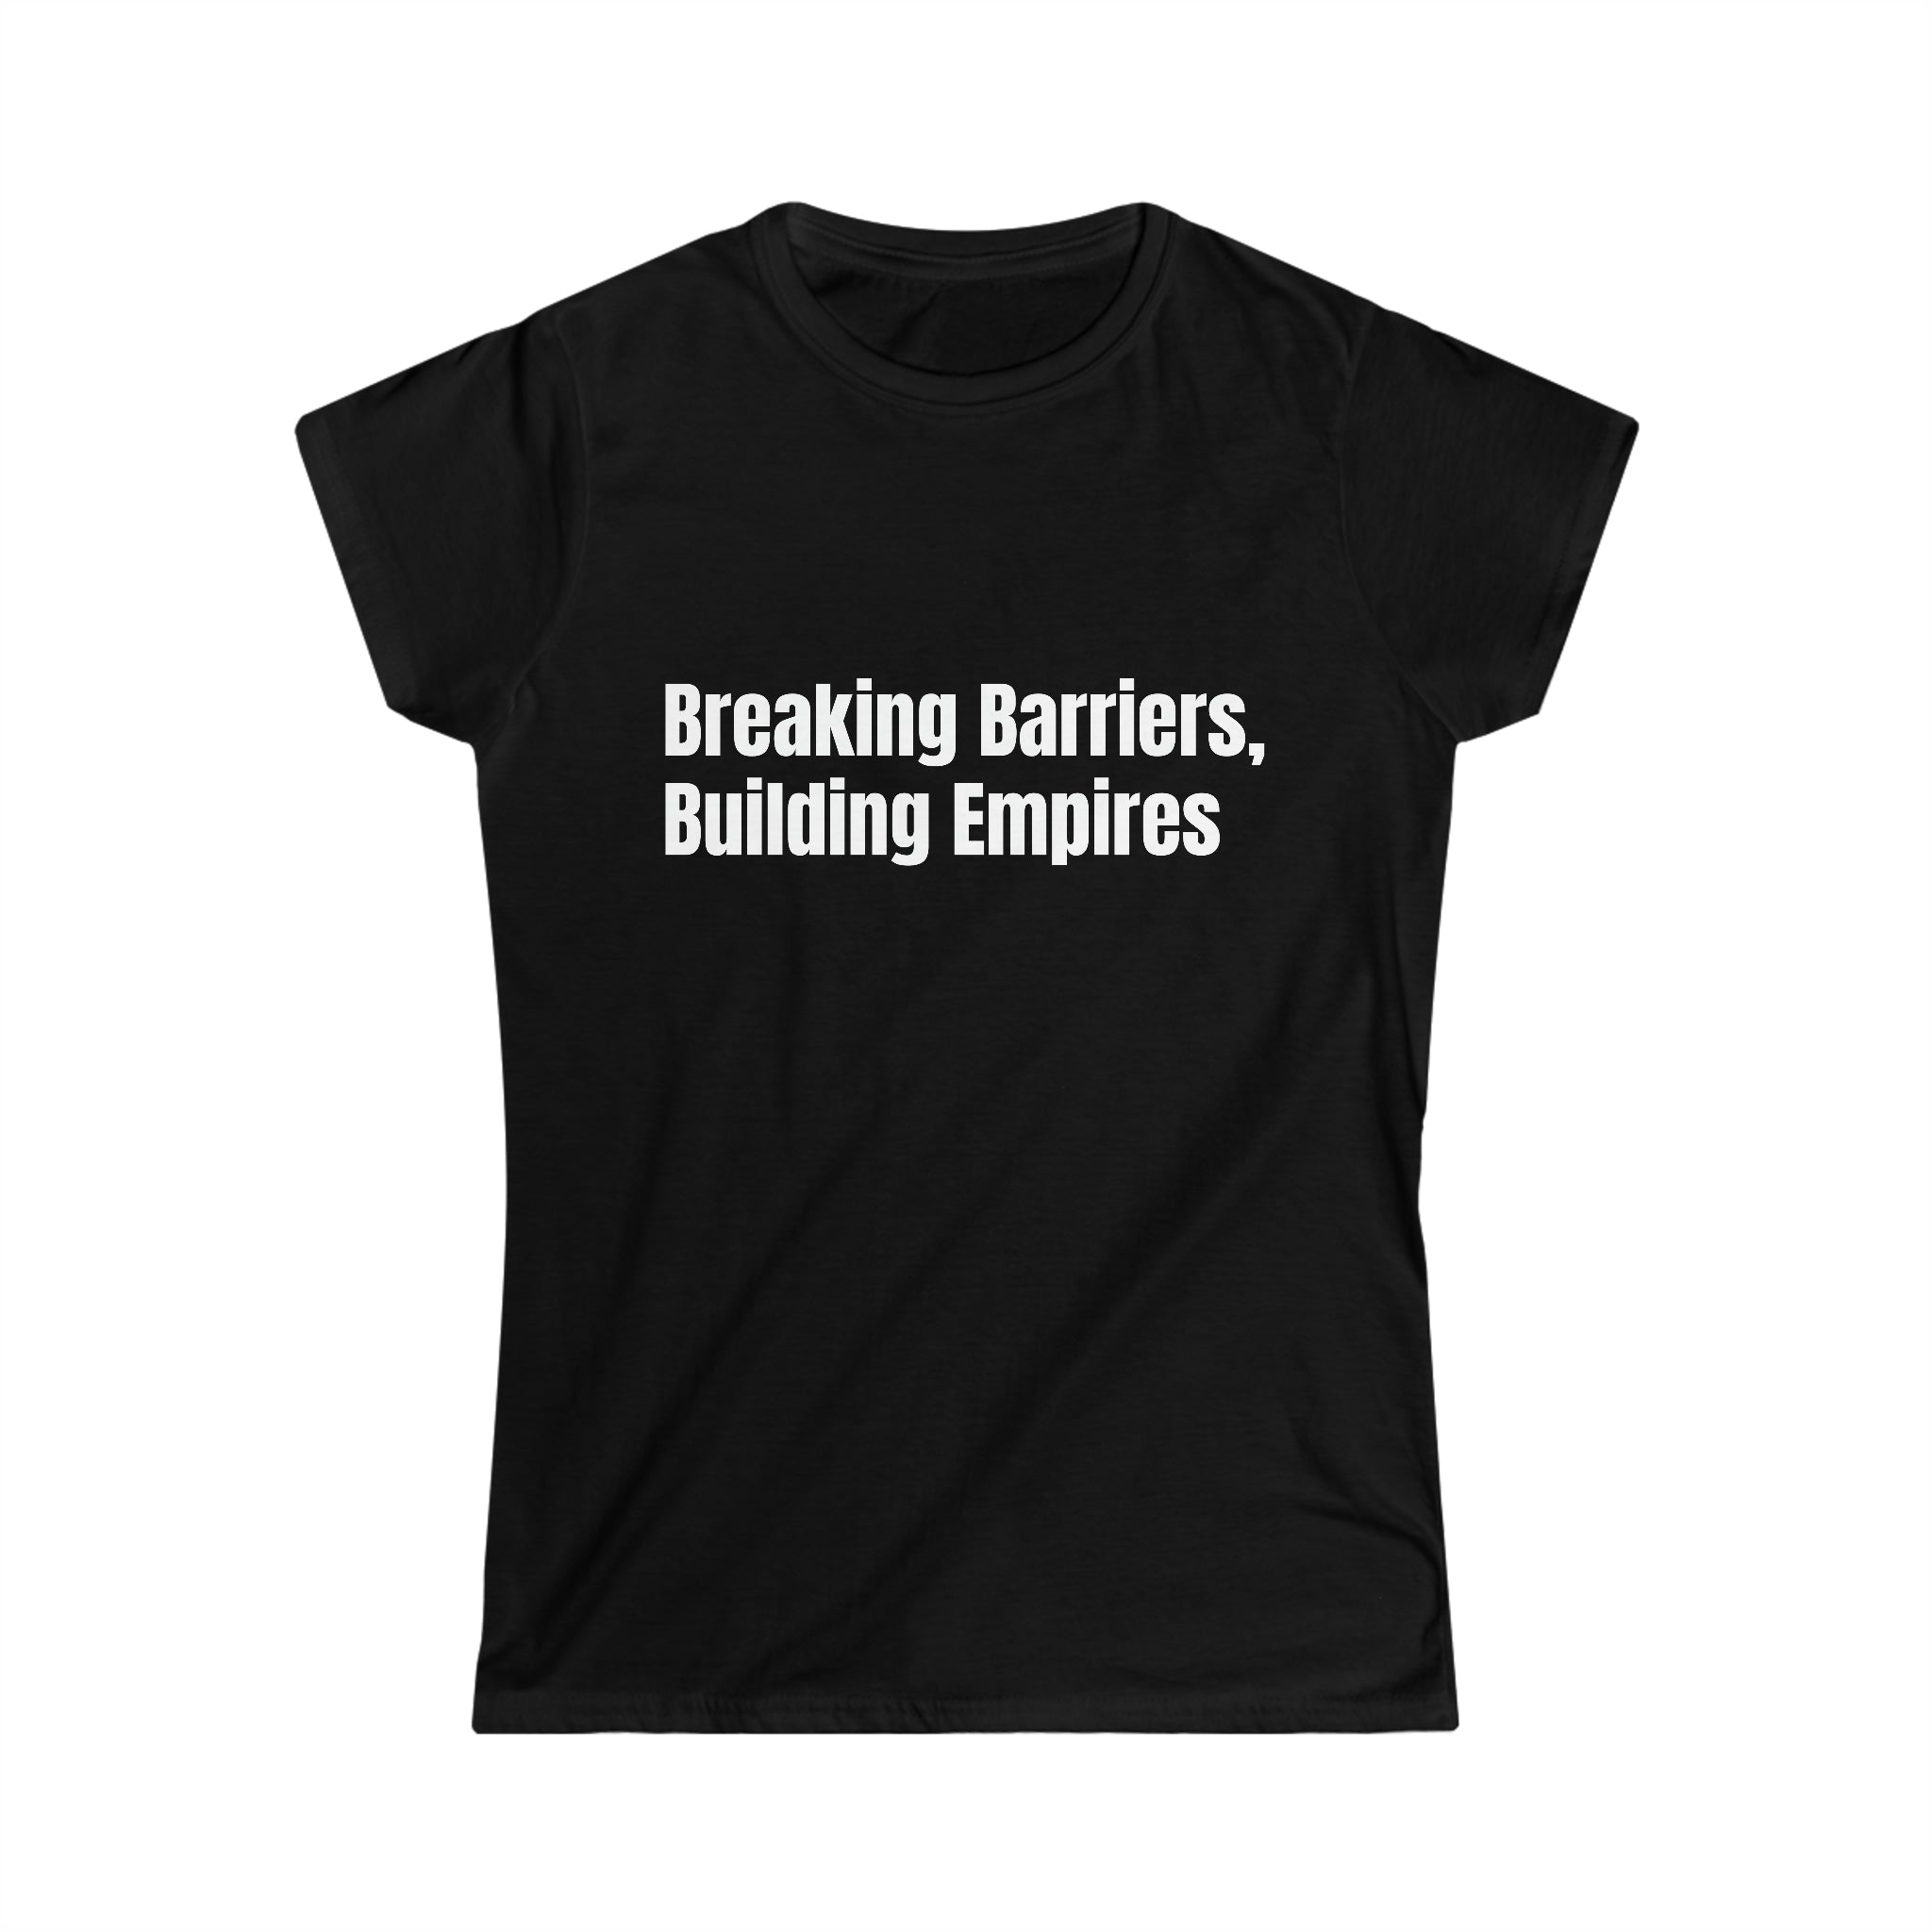 Building Empires Softstyle Tee